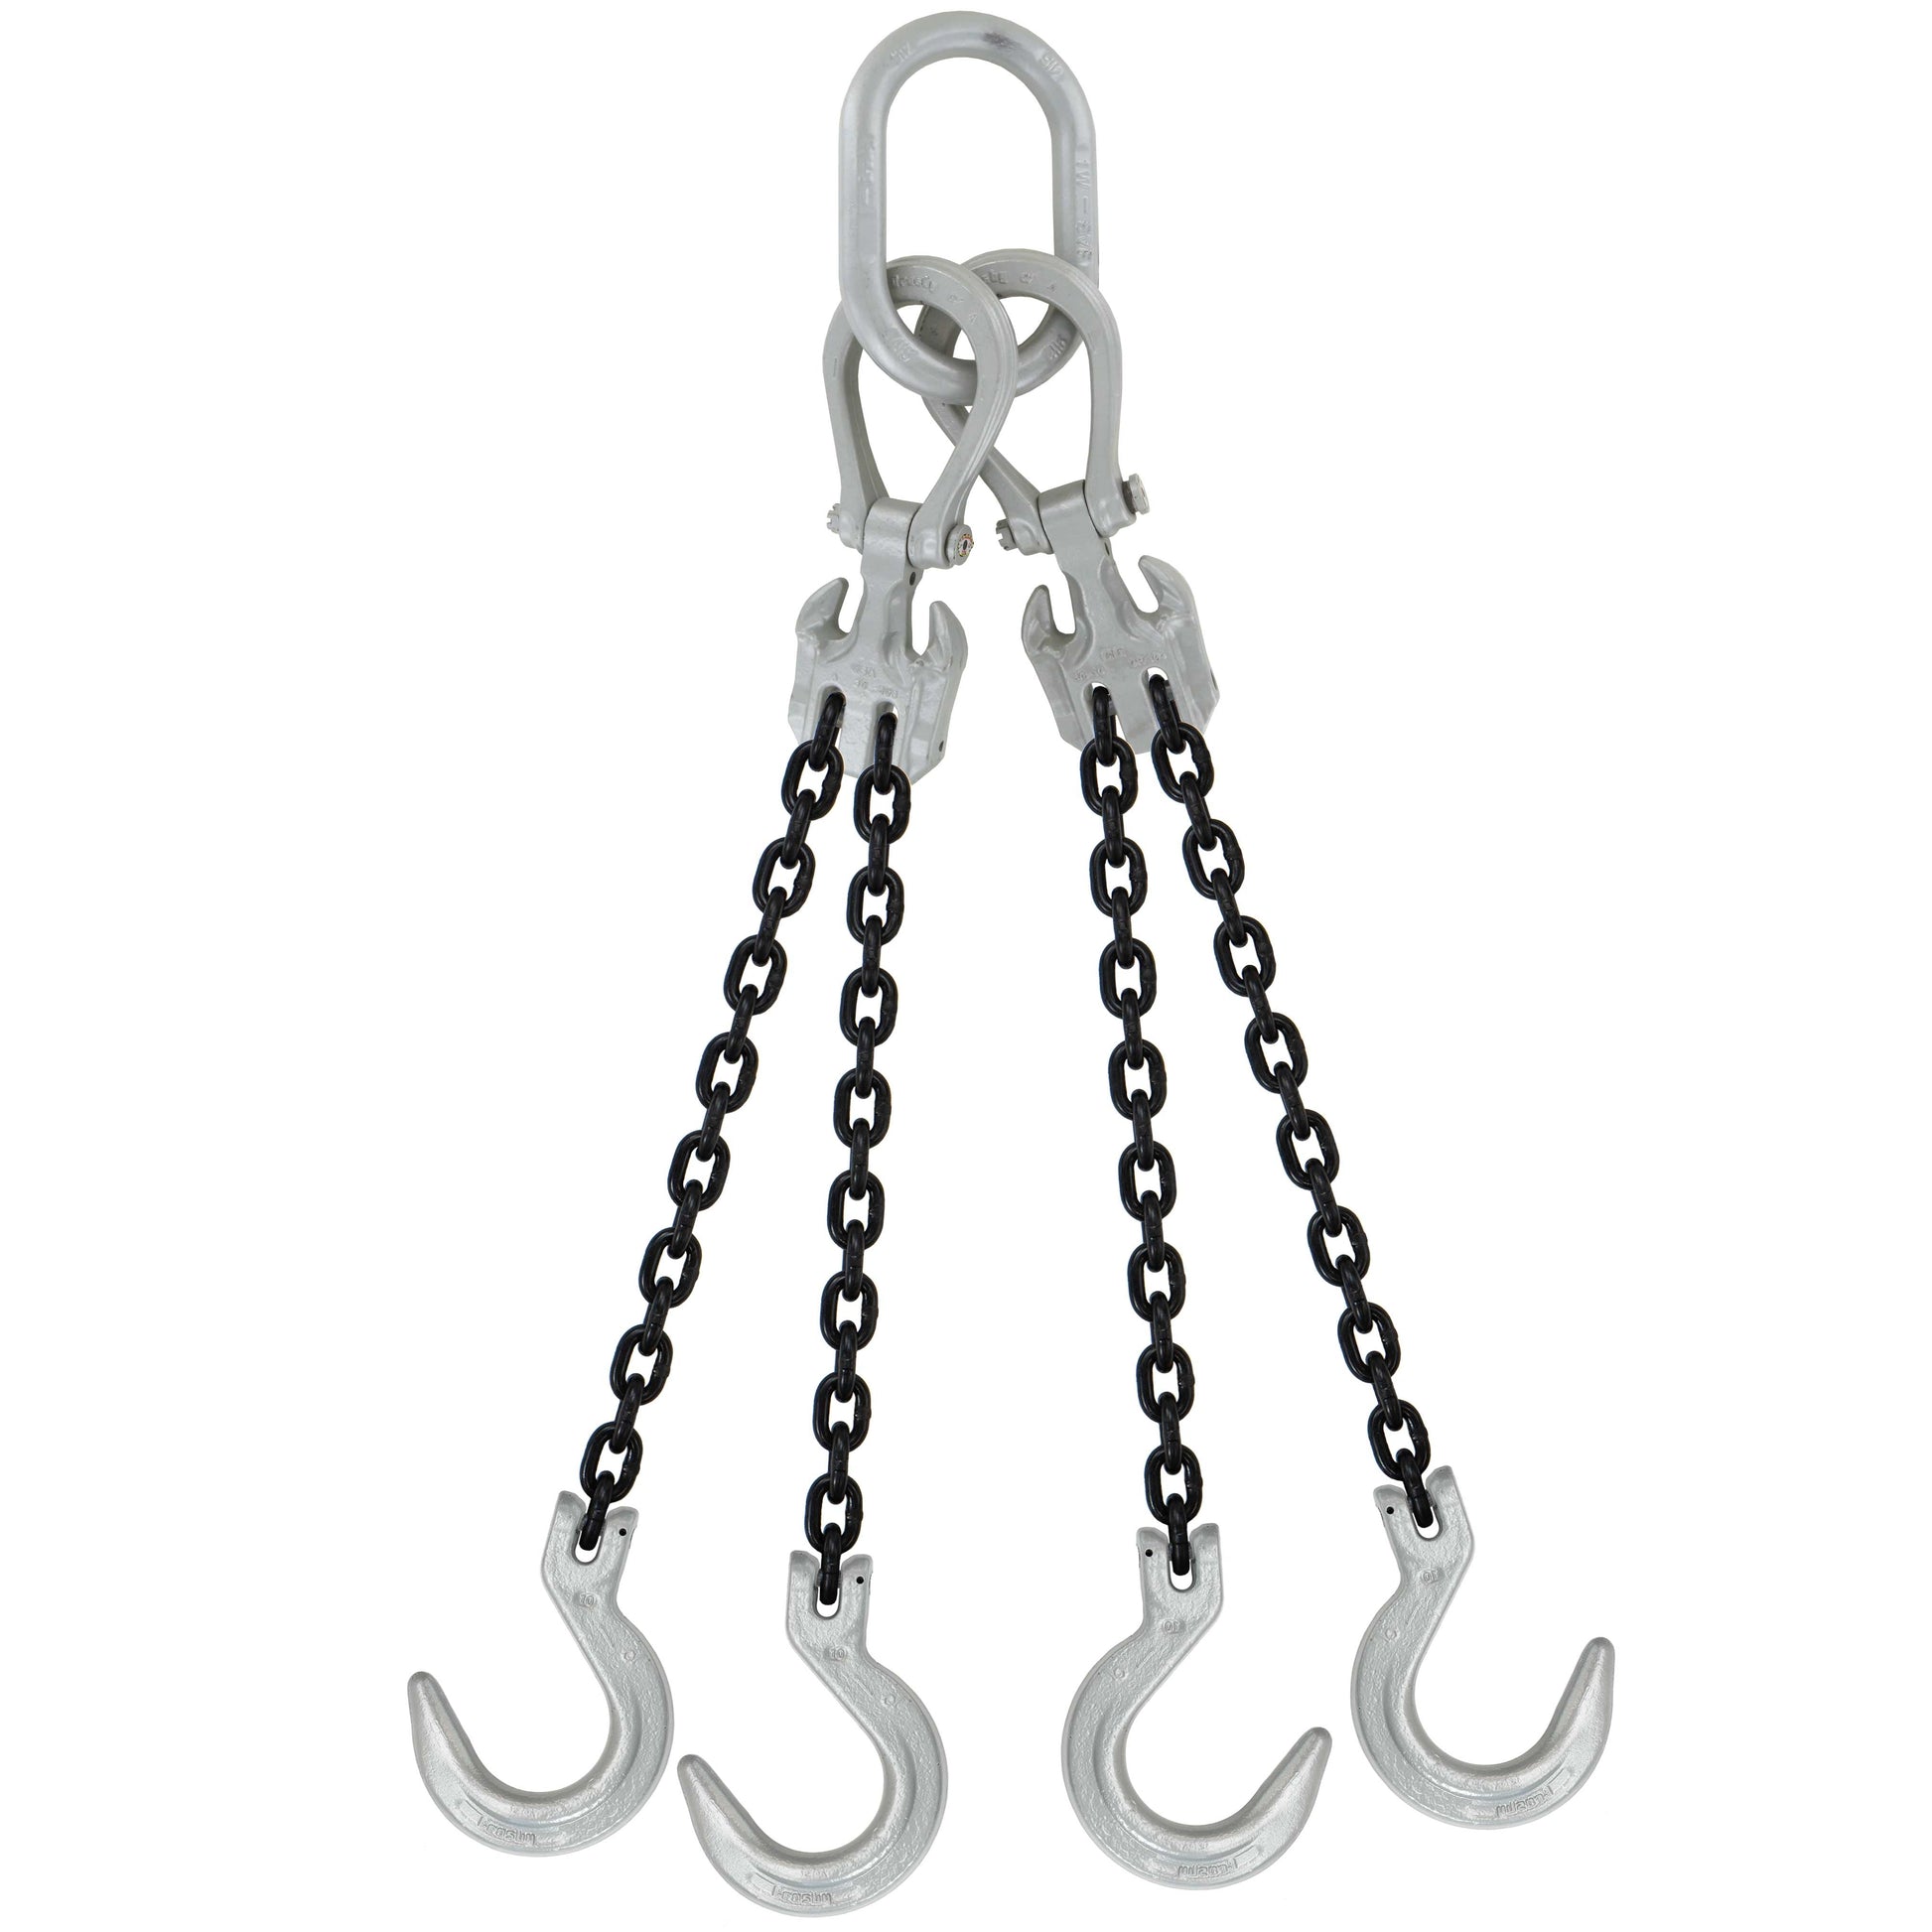 38 inch x 20 foot Domestic Adjustable 4 Leg Chain Sling w Crosby Foundry Hooks Grade 100 image 1 of 2